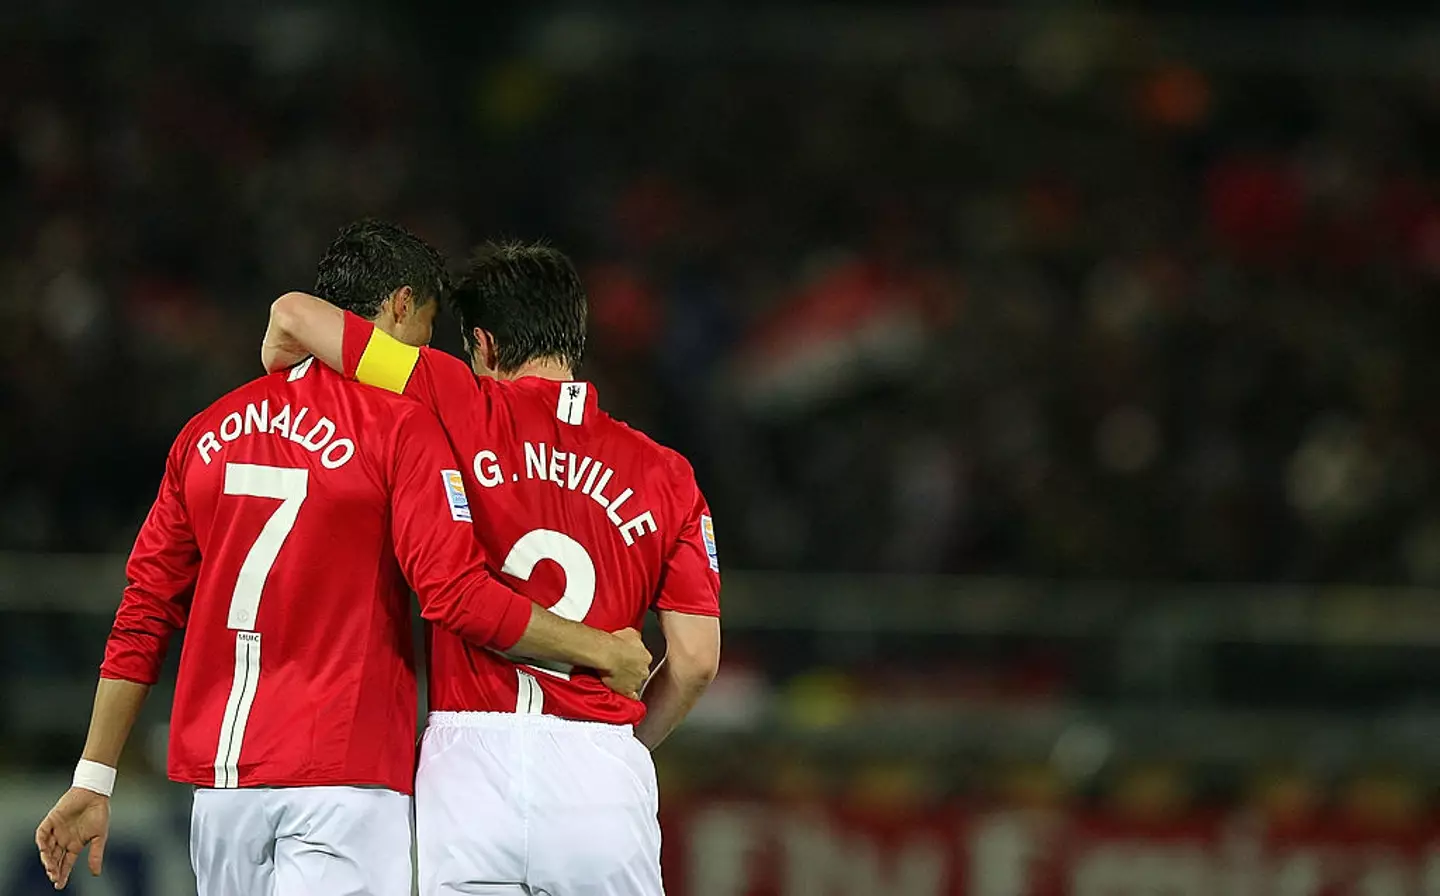 Gary Neville and Cristiano Ronaldo won three Premier League titles together at Manchester United (Image: Getty)